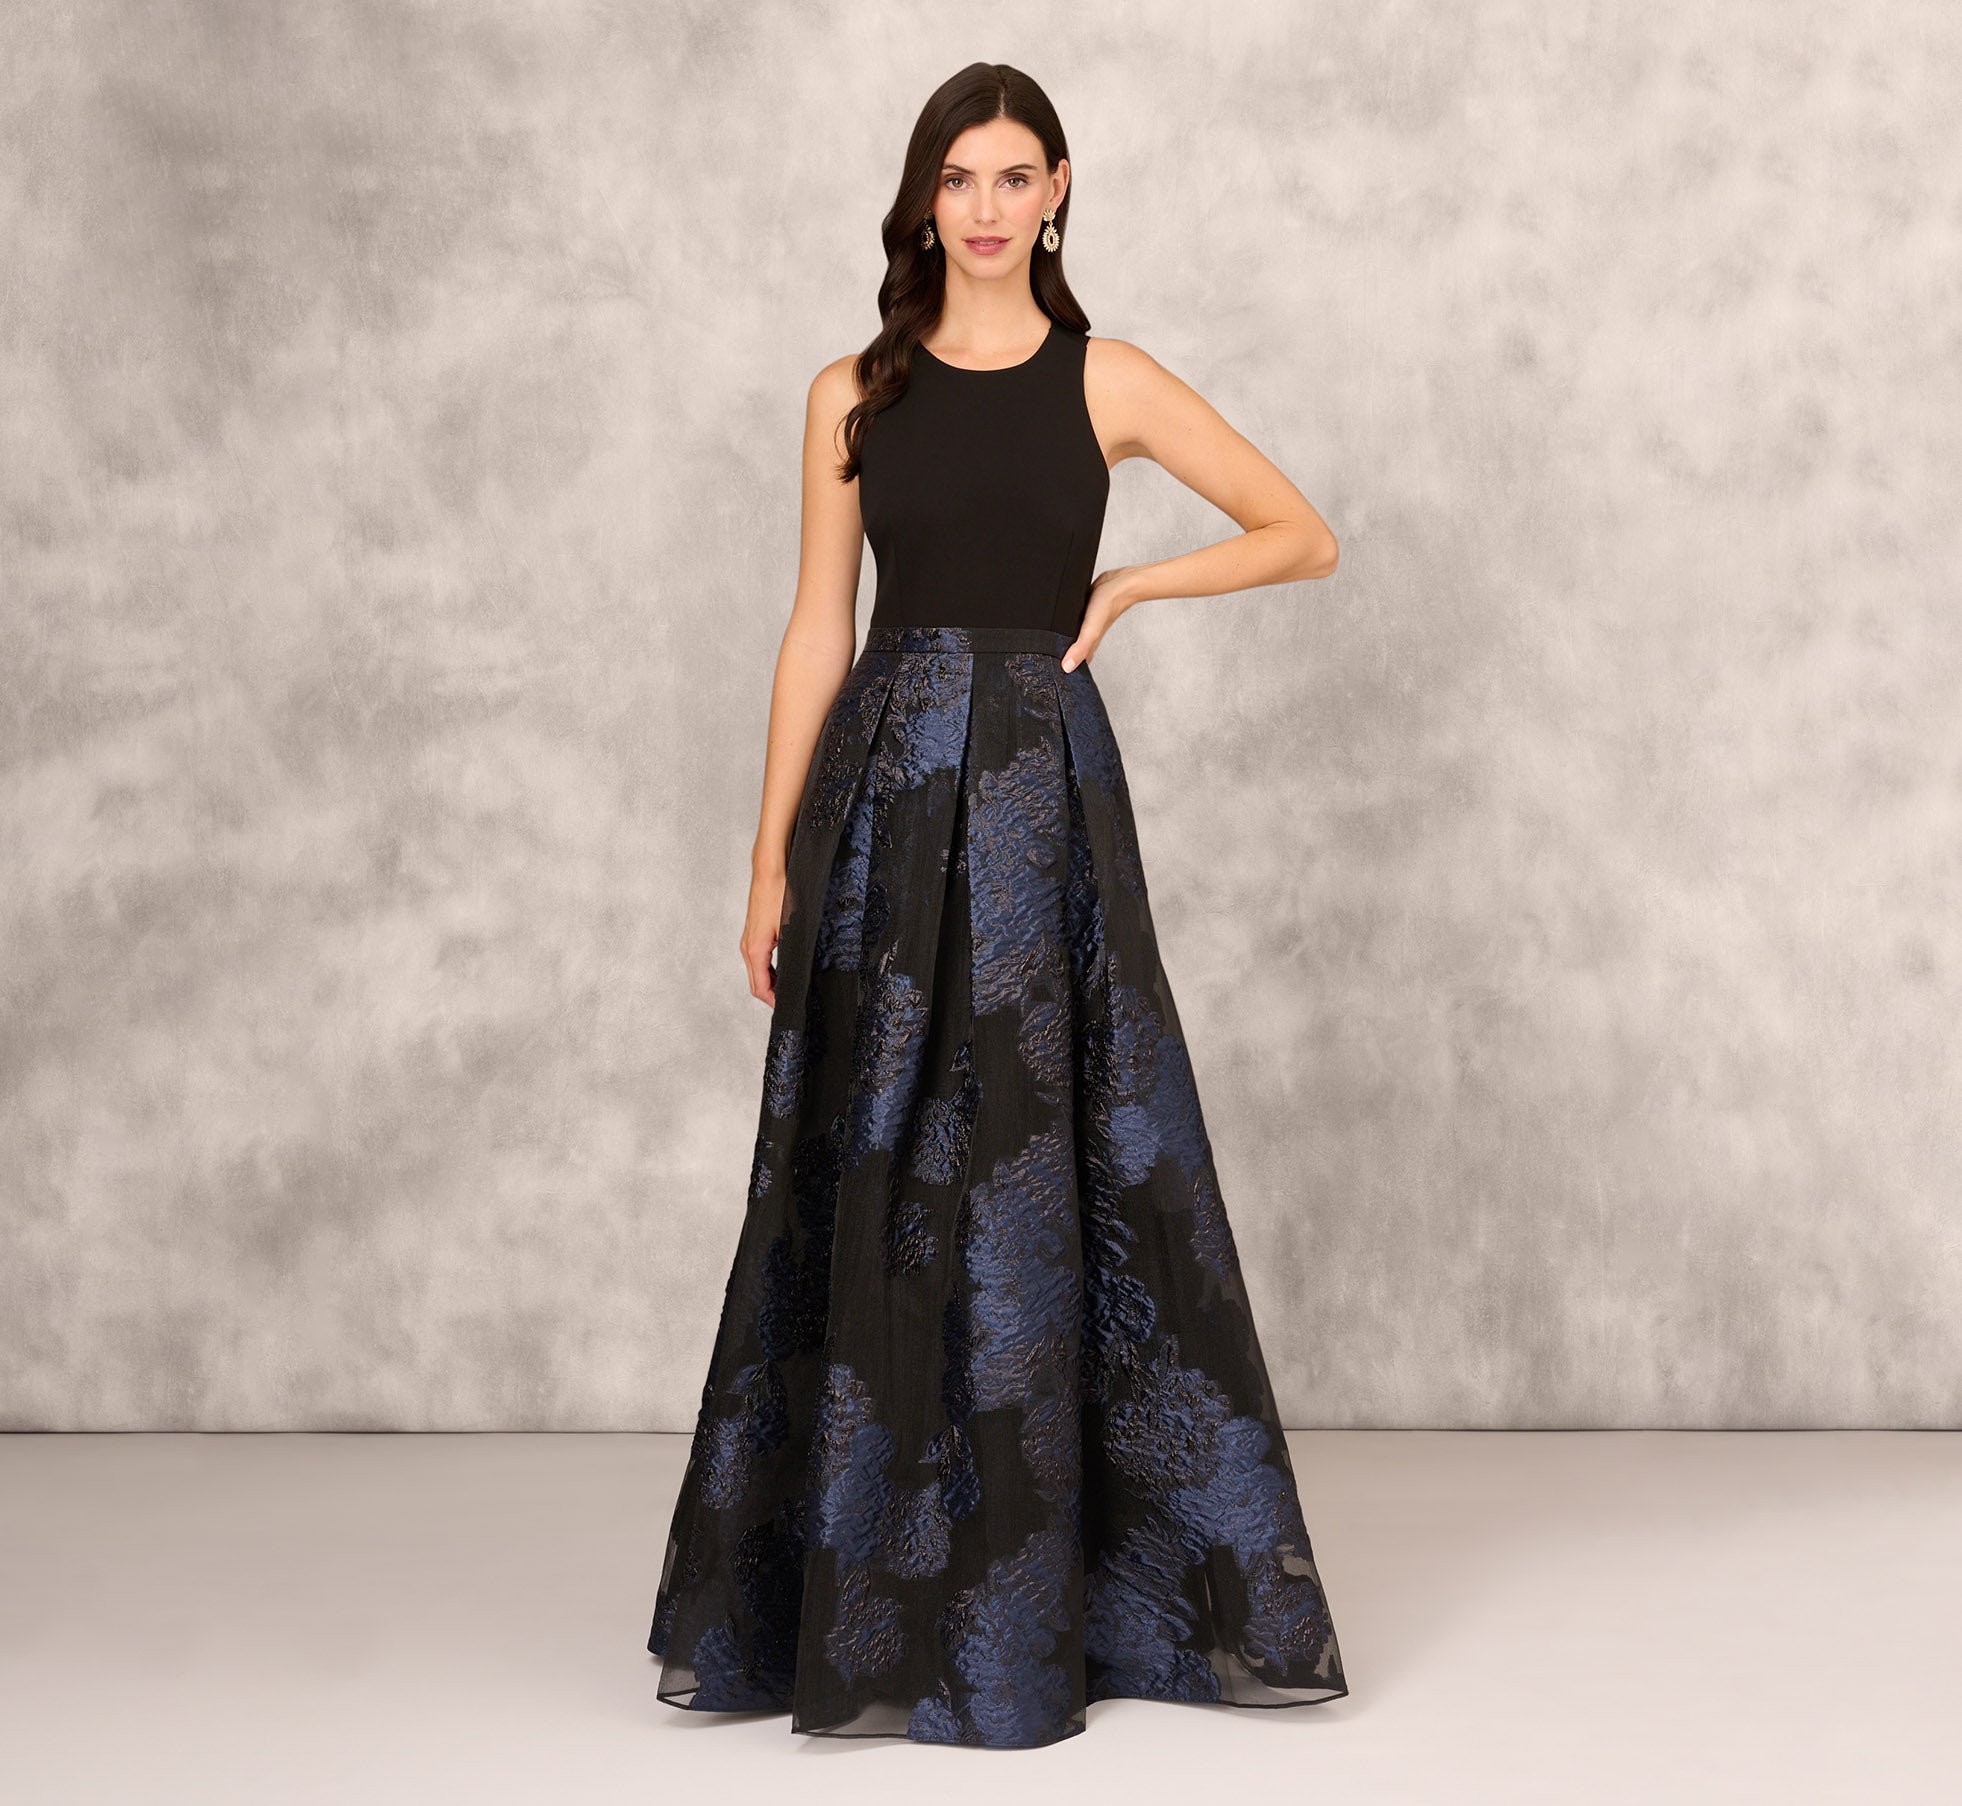 Halter Ball Gown With Floral Jacquard Skirt In Navy Multi